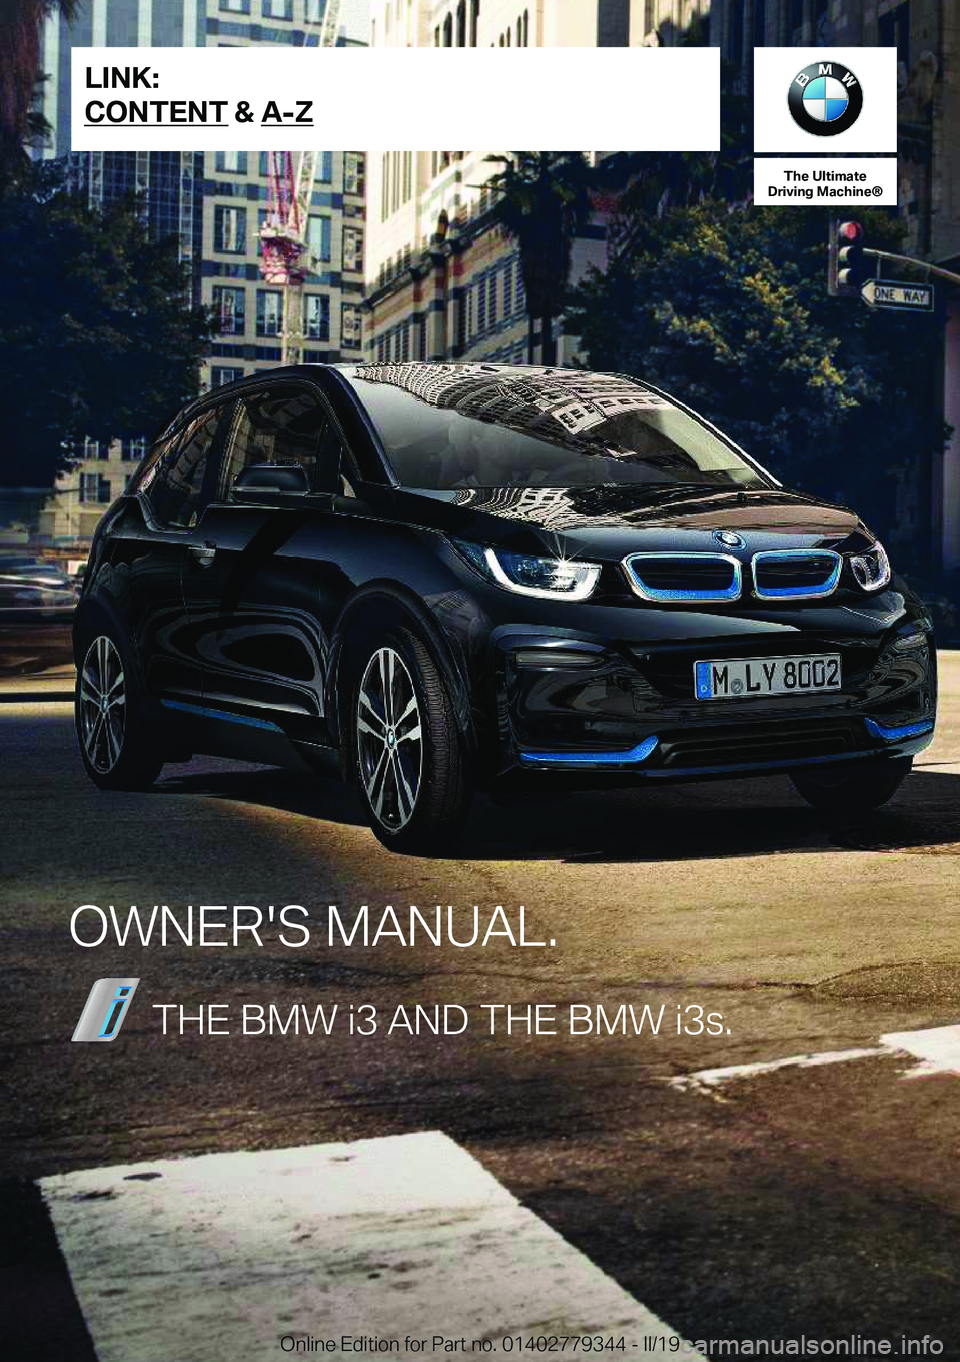 BMW I3 2019  Owners Manual �T�h�e��U�l�U�i�m�B�U�e
�D�S�i�W�i�n�g��M�B�c�h�i�n�e�n
�O�W�N�E�R�'�S��M�A�N�U�A�L�.�T�H�E��B�M�W��i�3��A�N�D��T�H�E��B�M�W��i�3�s�.�L�I�N�K�:
�C�O�N�T�E�N�T����A��;�O�n�l�i�n�e��E�